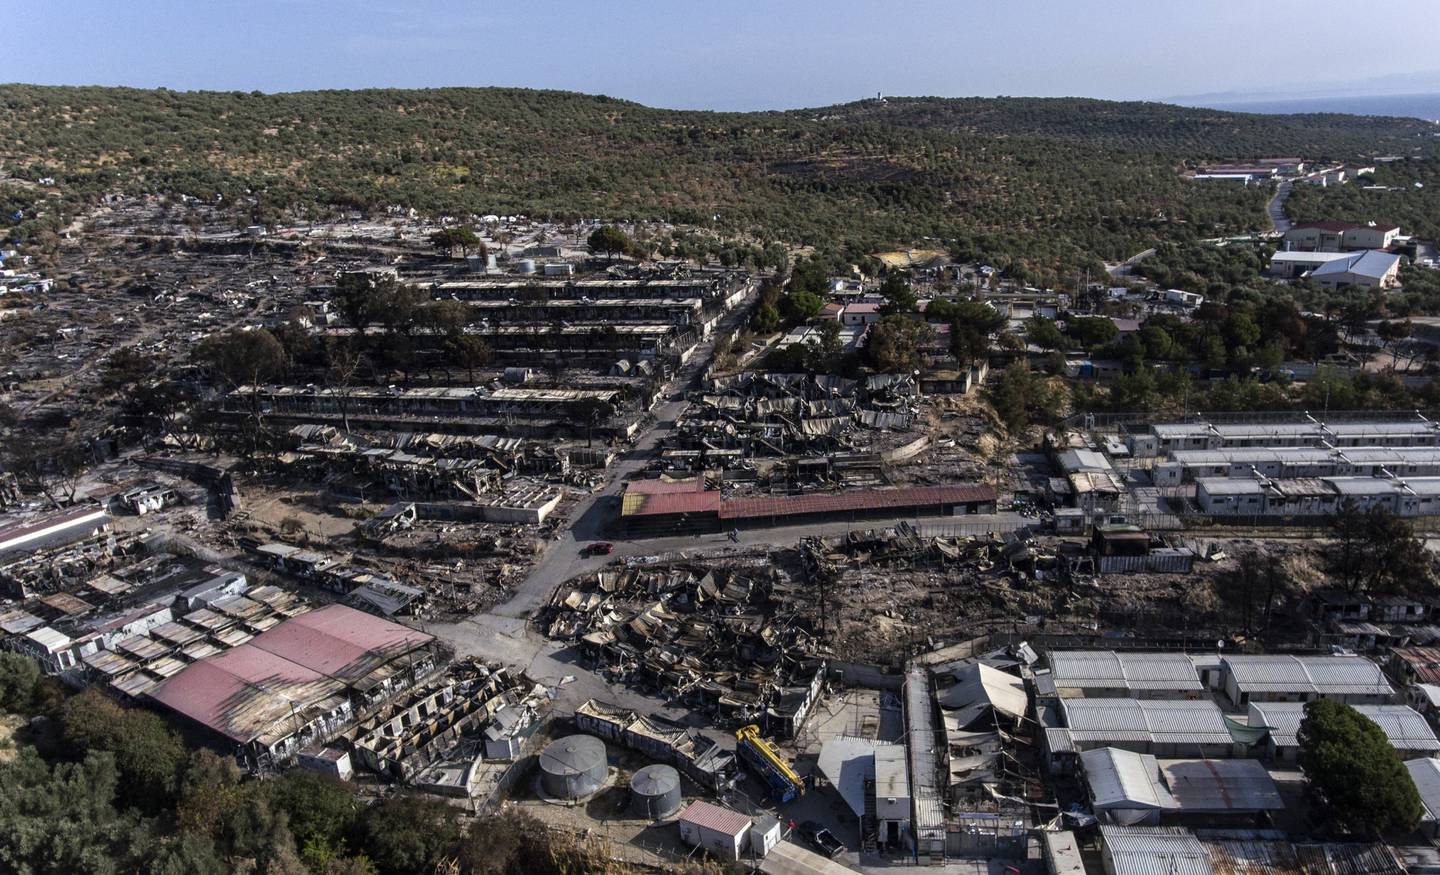 The burned Moria refugee camp is seen from above on the northeastern island of Lesbos, Greece, Monday, Sept. 28, 2020. About 700 people will leave later today from Lesbos for mainland Greece, twenty days after successive fires that started before dawn on Sept. 9, devastating the Moria refugee camp and making more than 12,000 inhabitants homeless during a COVD-19 lockdown. (AP Photo/Panagiotis Balaskas)